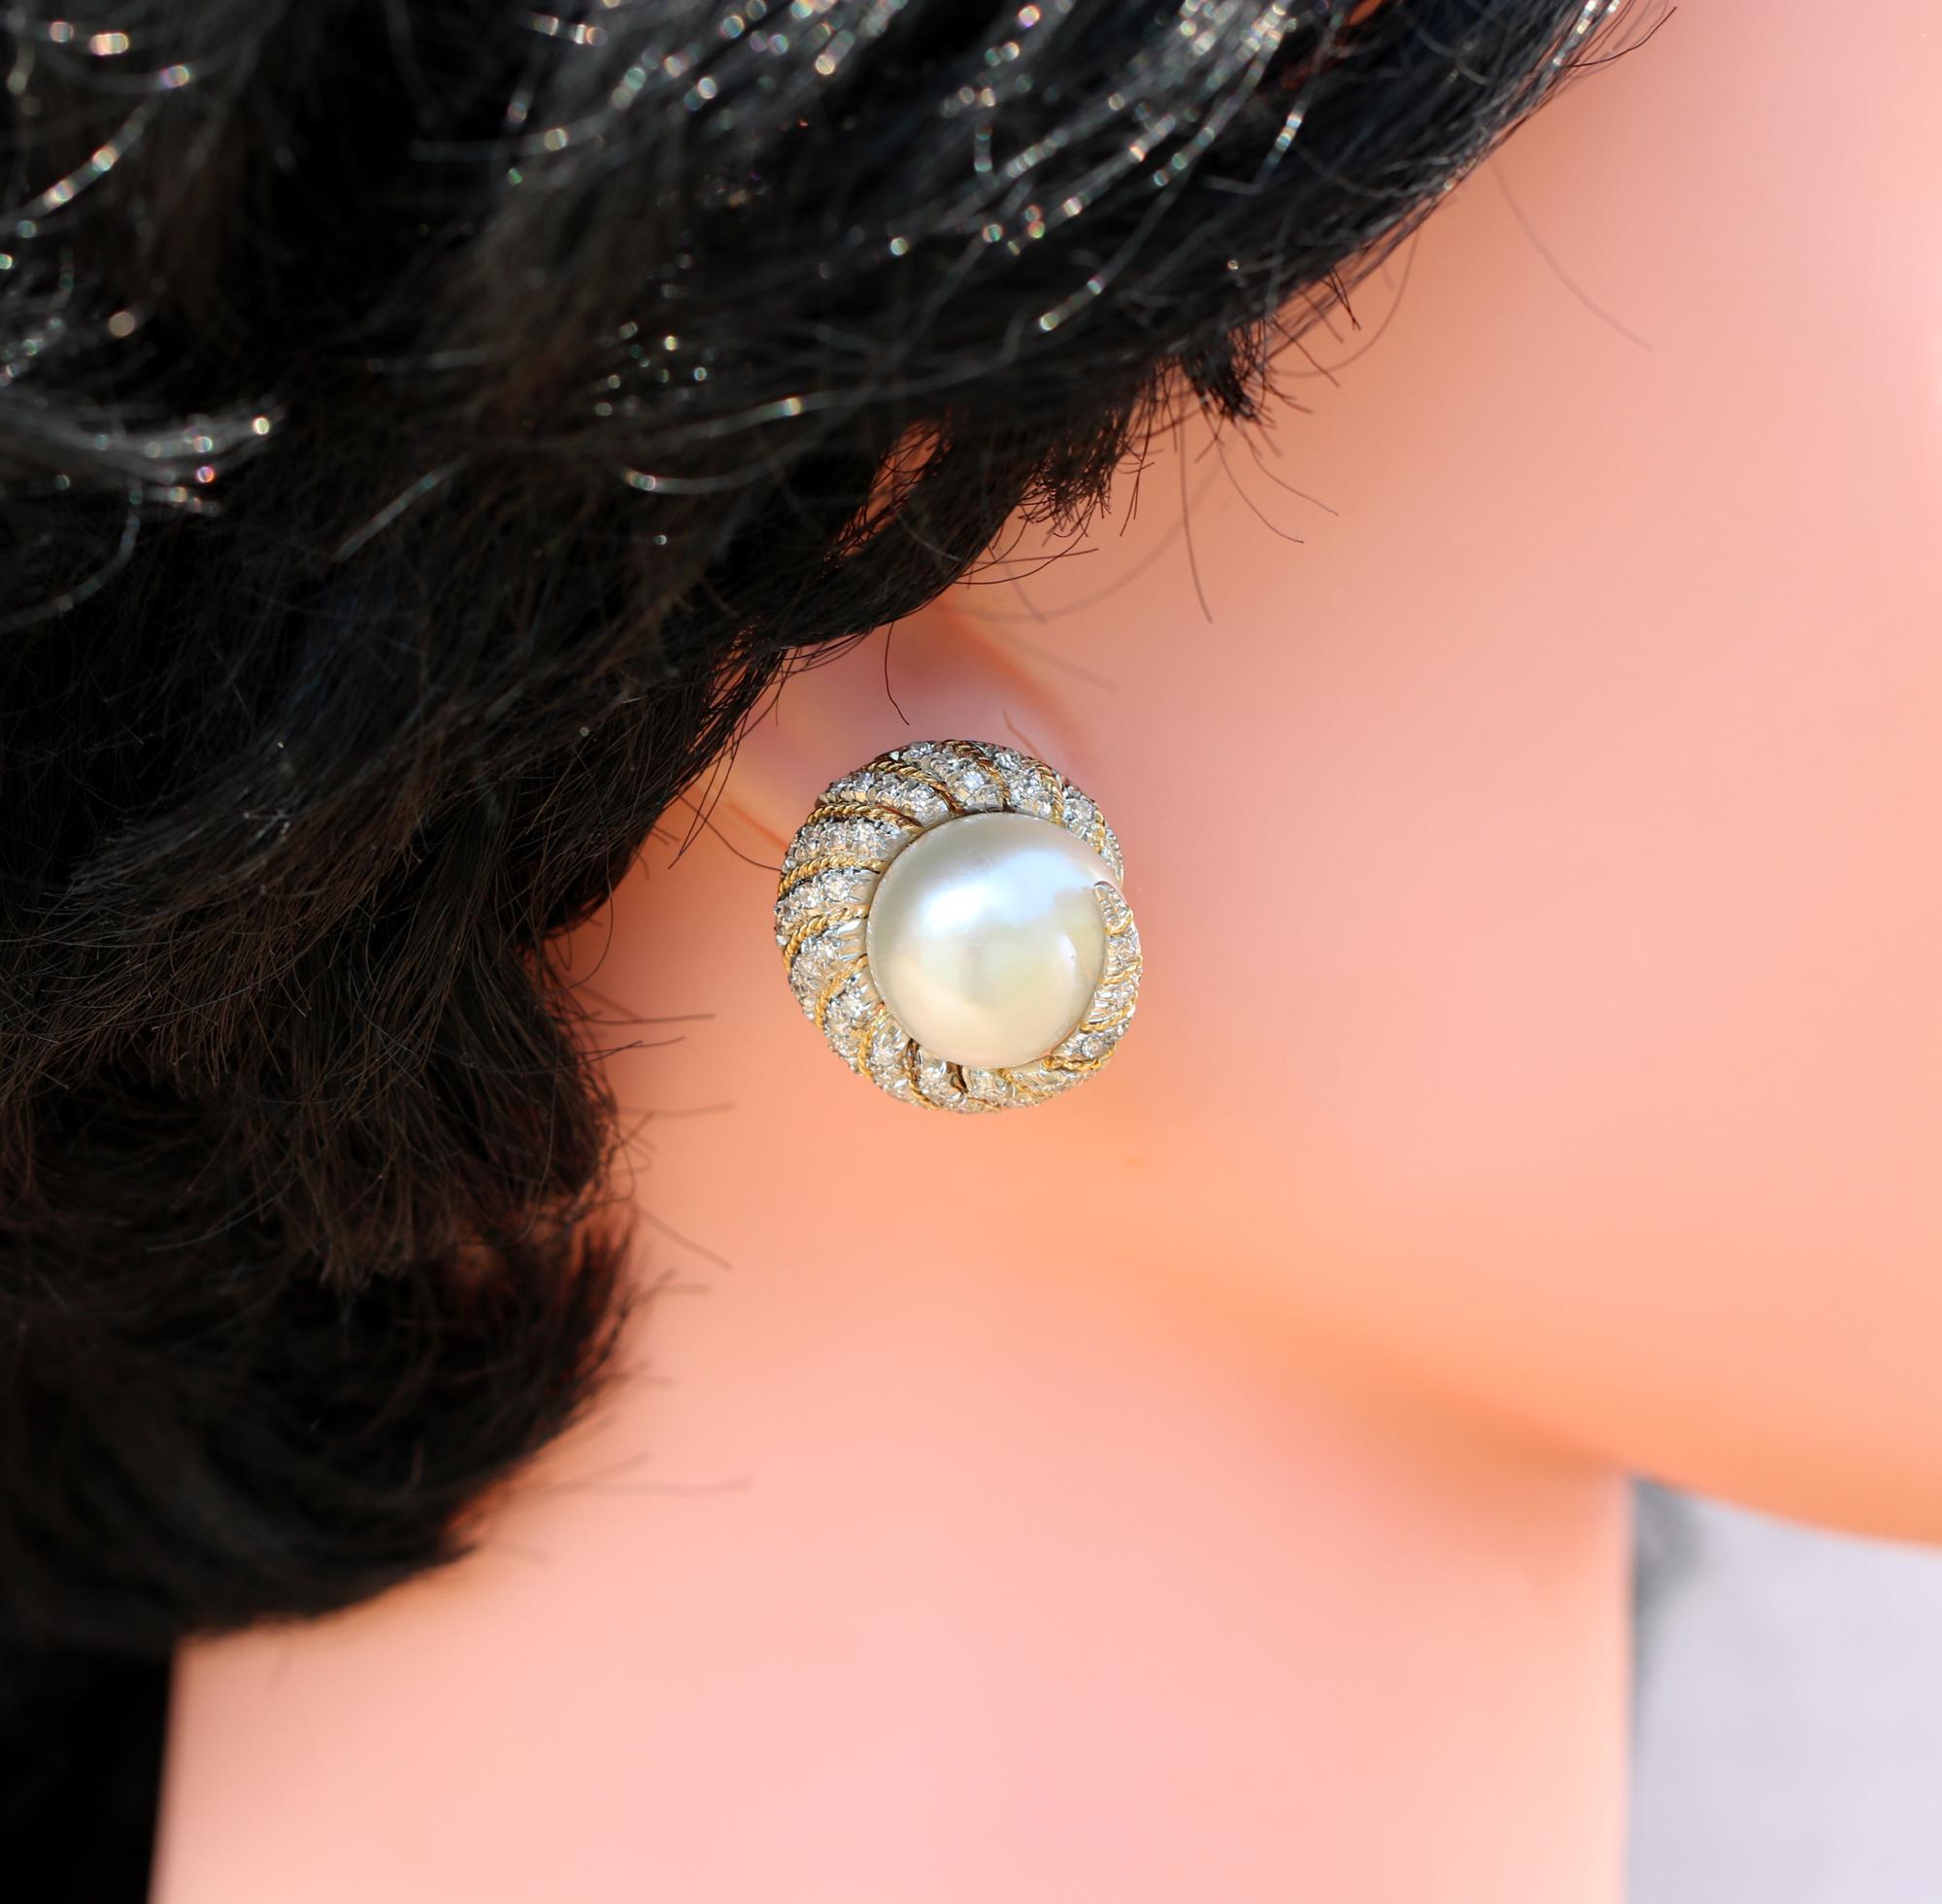 A pair of 18K white gold earrings borrowing design cues from the sea, with a nautilus like style. At the center of each earring is an approximately 15mm large South Sea pearl. Wrapping around the pearls are a combined total of approximately 1.40ct